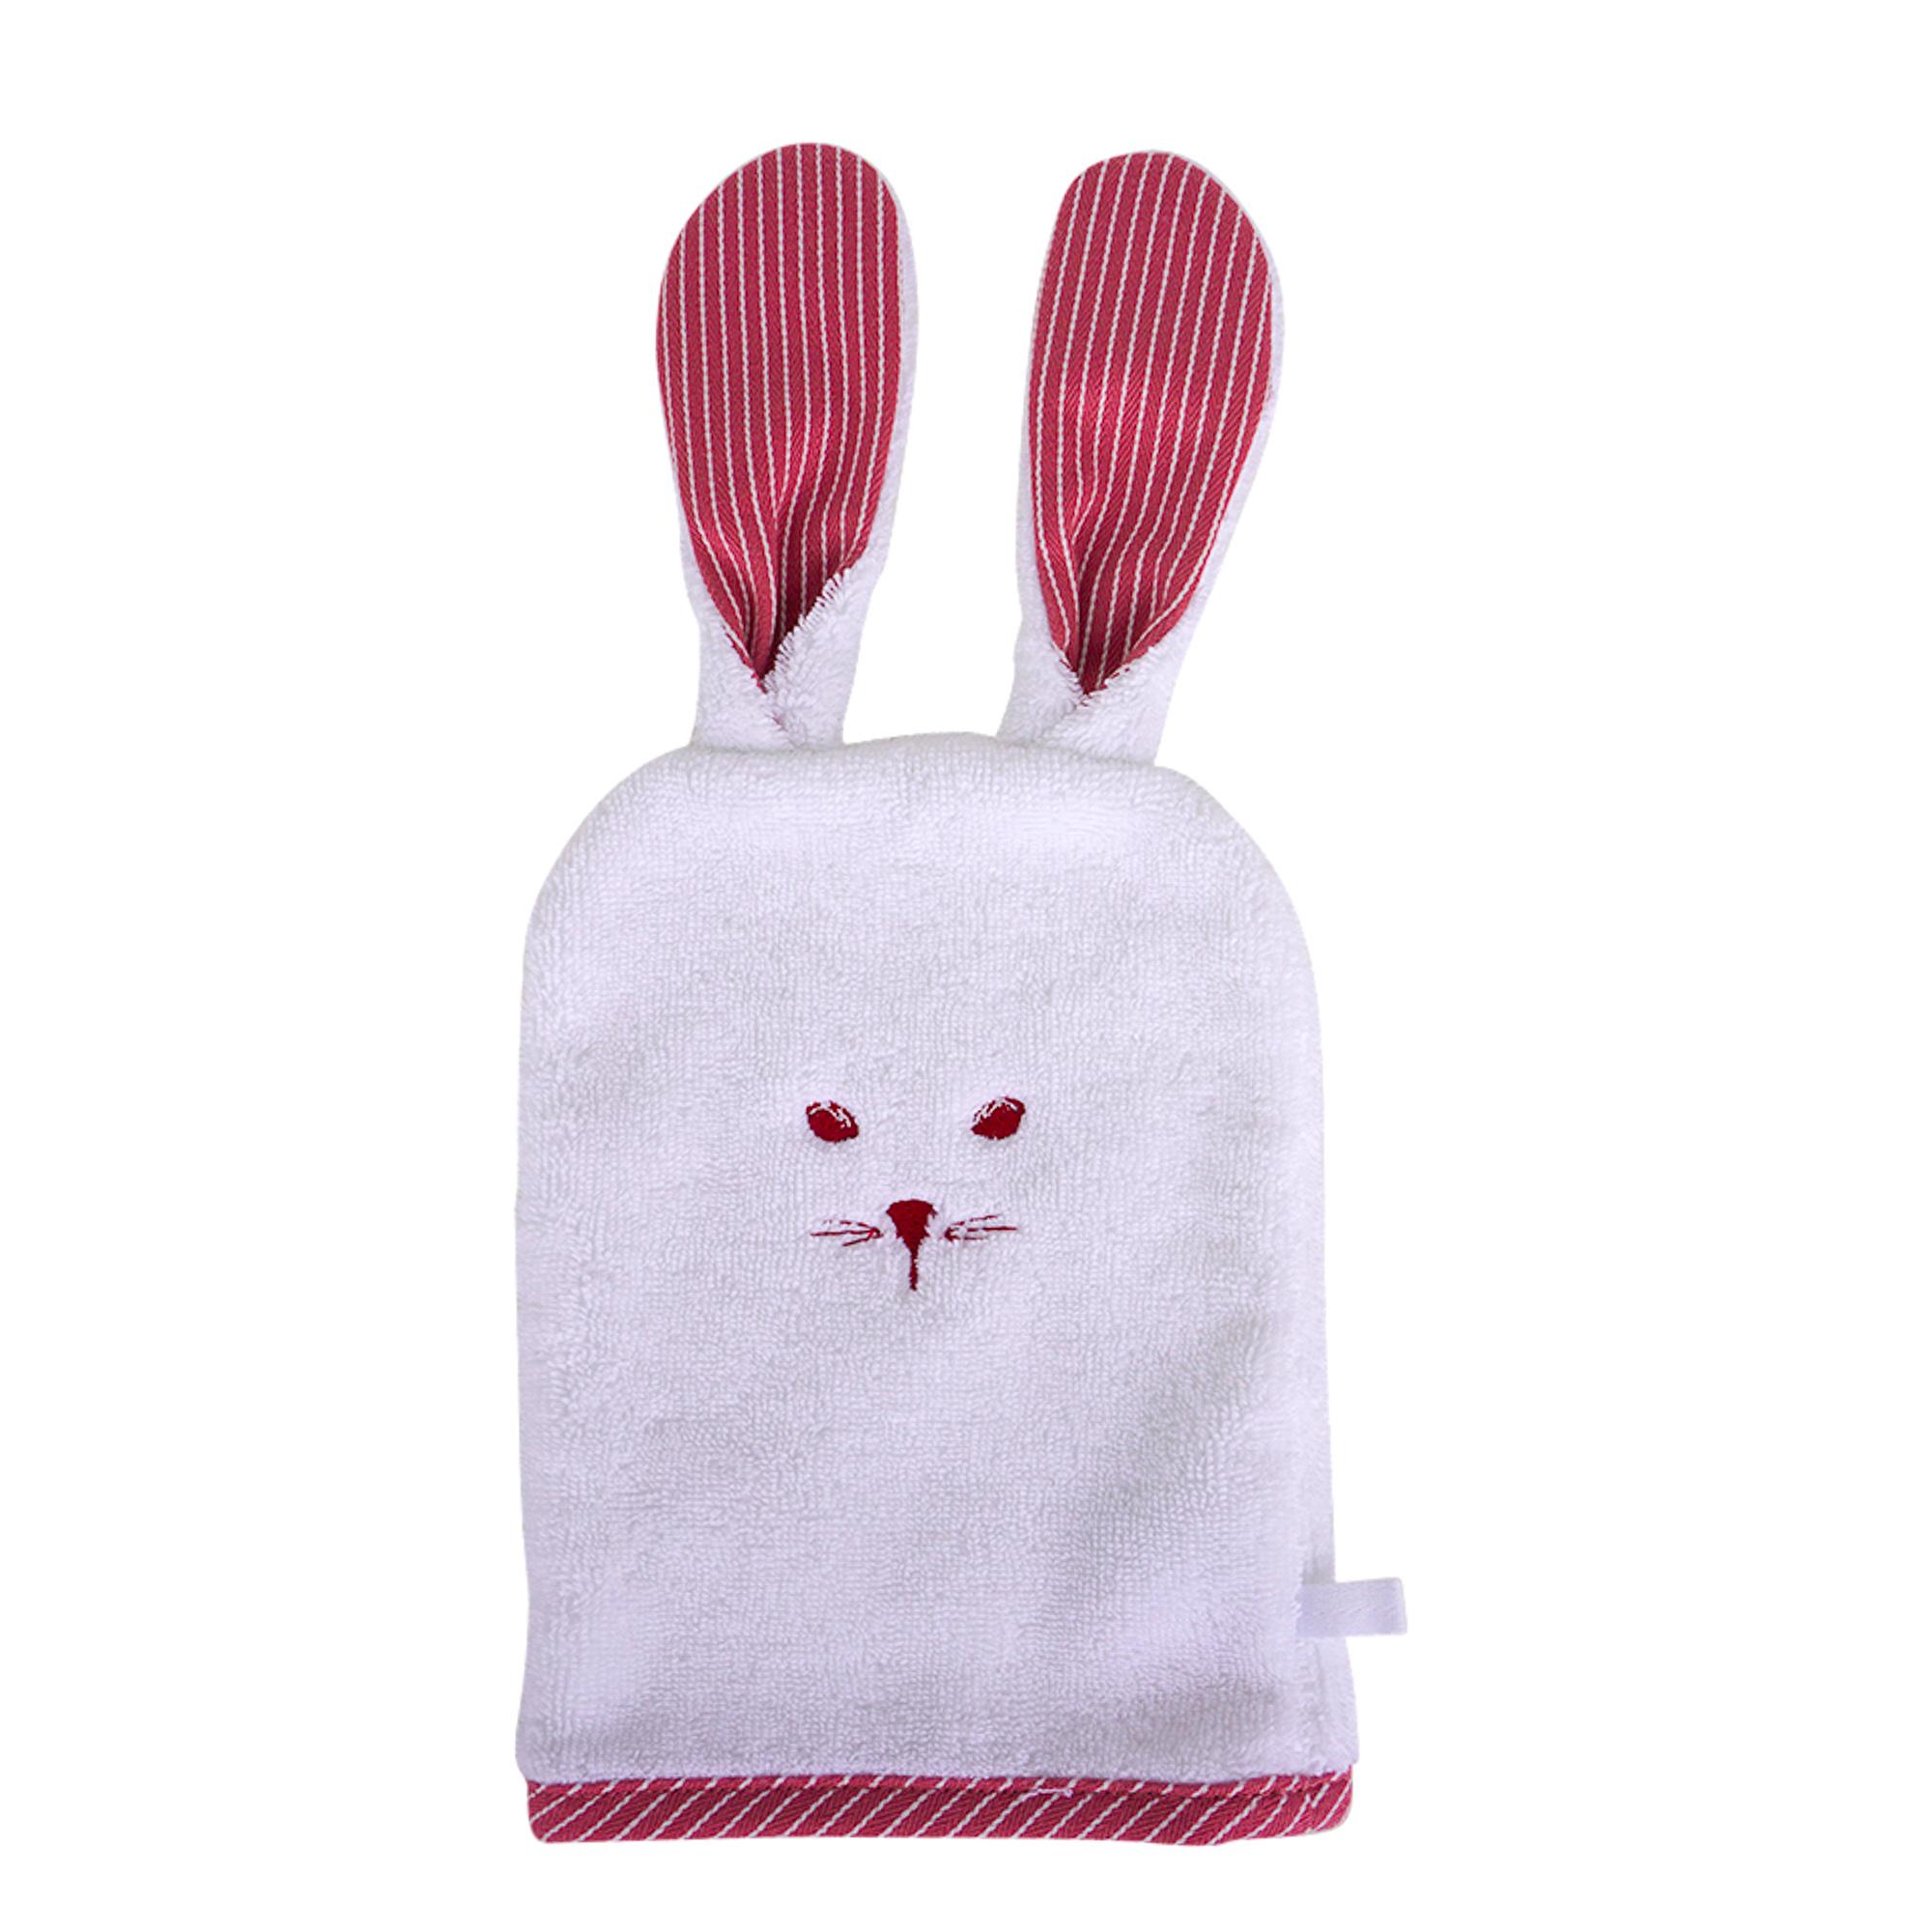 Mightychic offers an Hermes Passe-Passe Washcloth featured in Figue.
Charming bunny face embroidered on front.
Lovely gift idea! 
Please see the matching Round Bib listed.
Fabric is 100% cotton.
New or Pristine Store Fresh Condition.
final